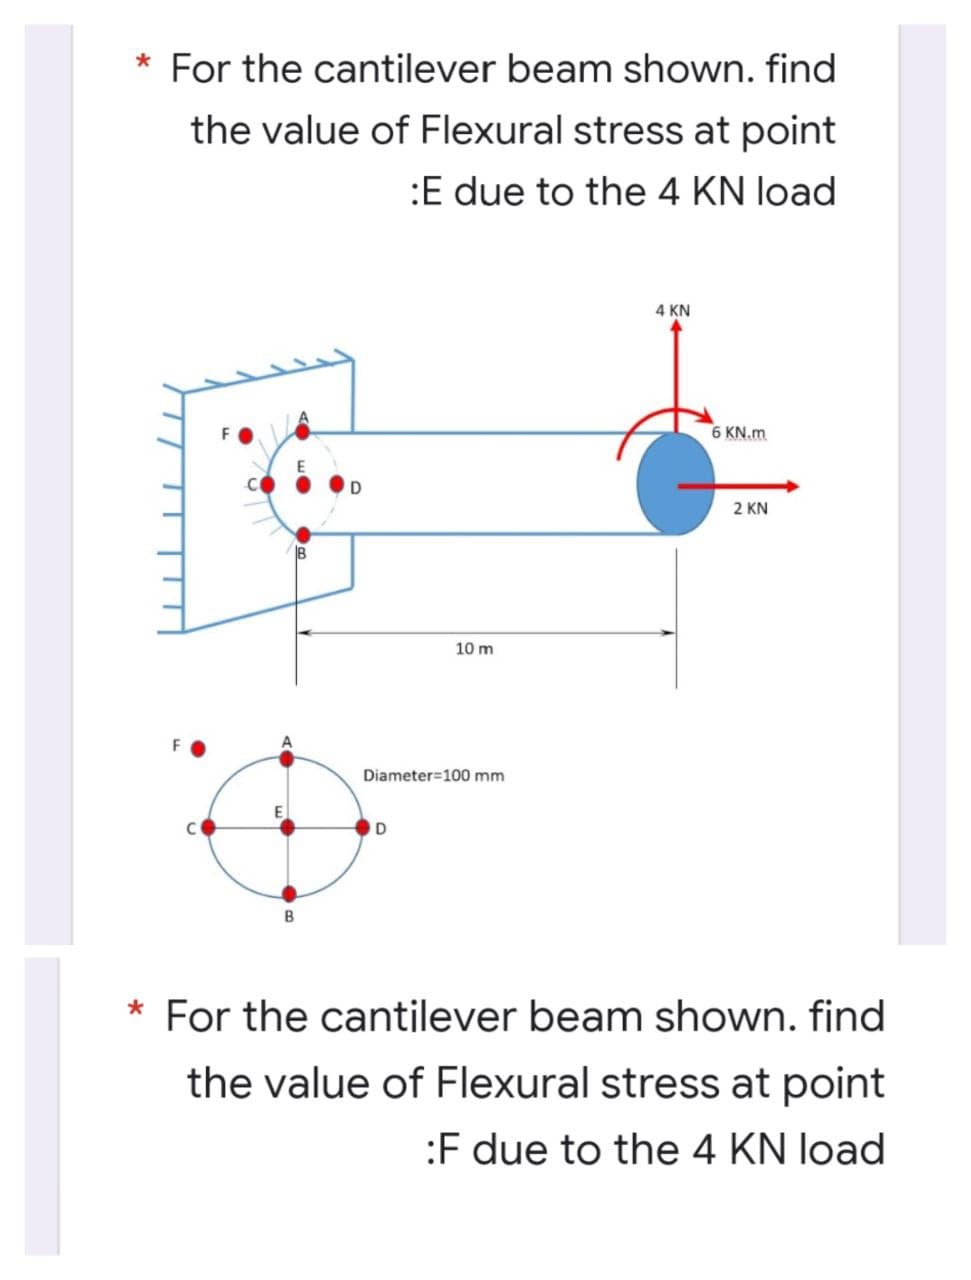 * For the cantilever beam shown. find
the value of Flexural stress at point
:E due to the 4 KN load
4 KN
6 KN.m
2 KN
B
10 m
Diameter=100 mm
D
* For the cantilever beam shown. find
the value of Flexural stress at point
:F due to the 4 KN load
